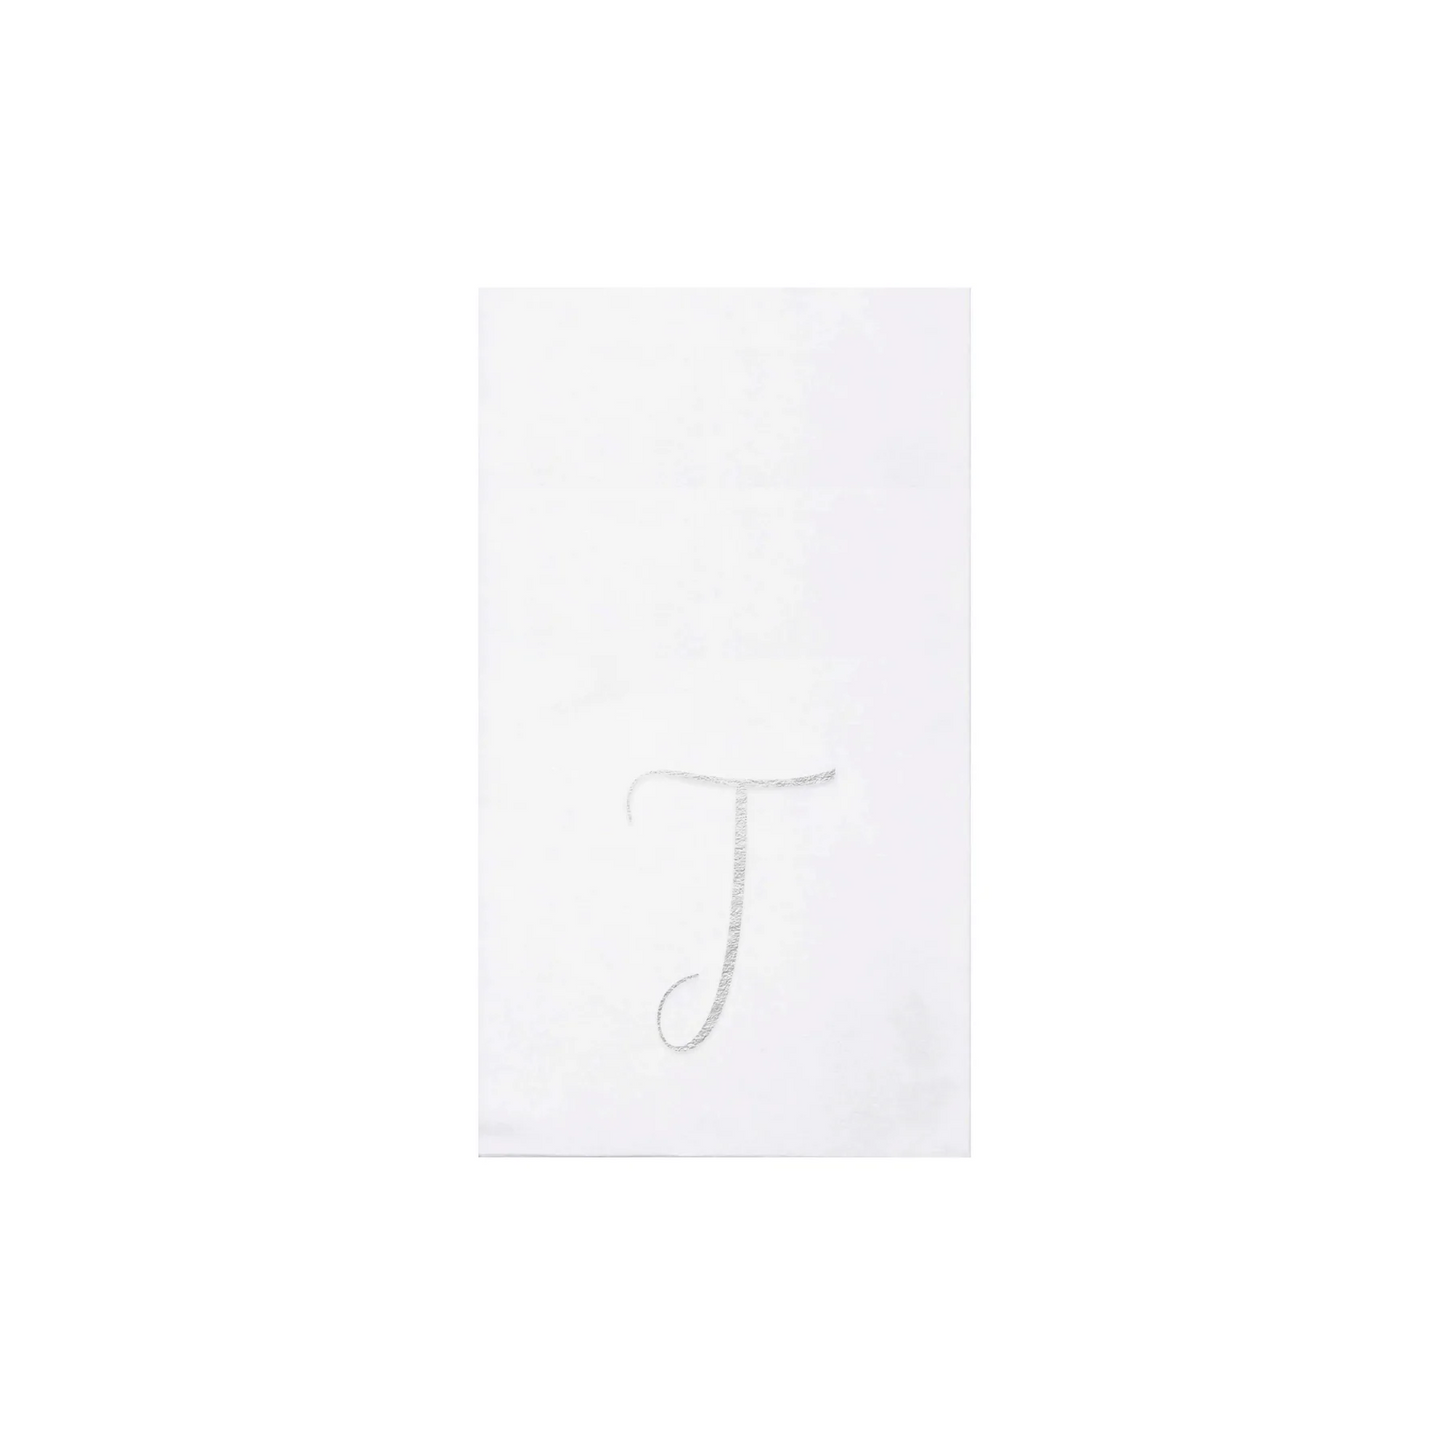 Vietri Papersoft Napkins Monogram Silver Guest Towels (Pack of 20)